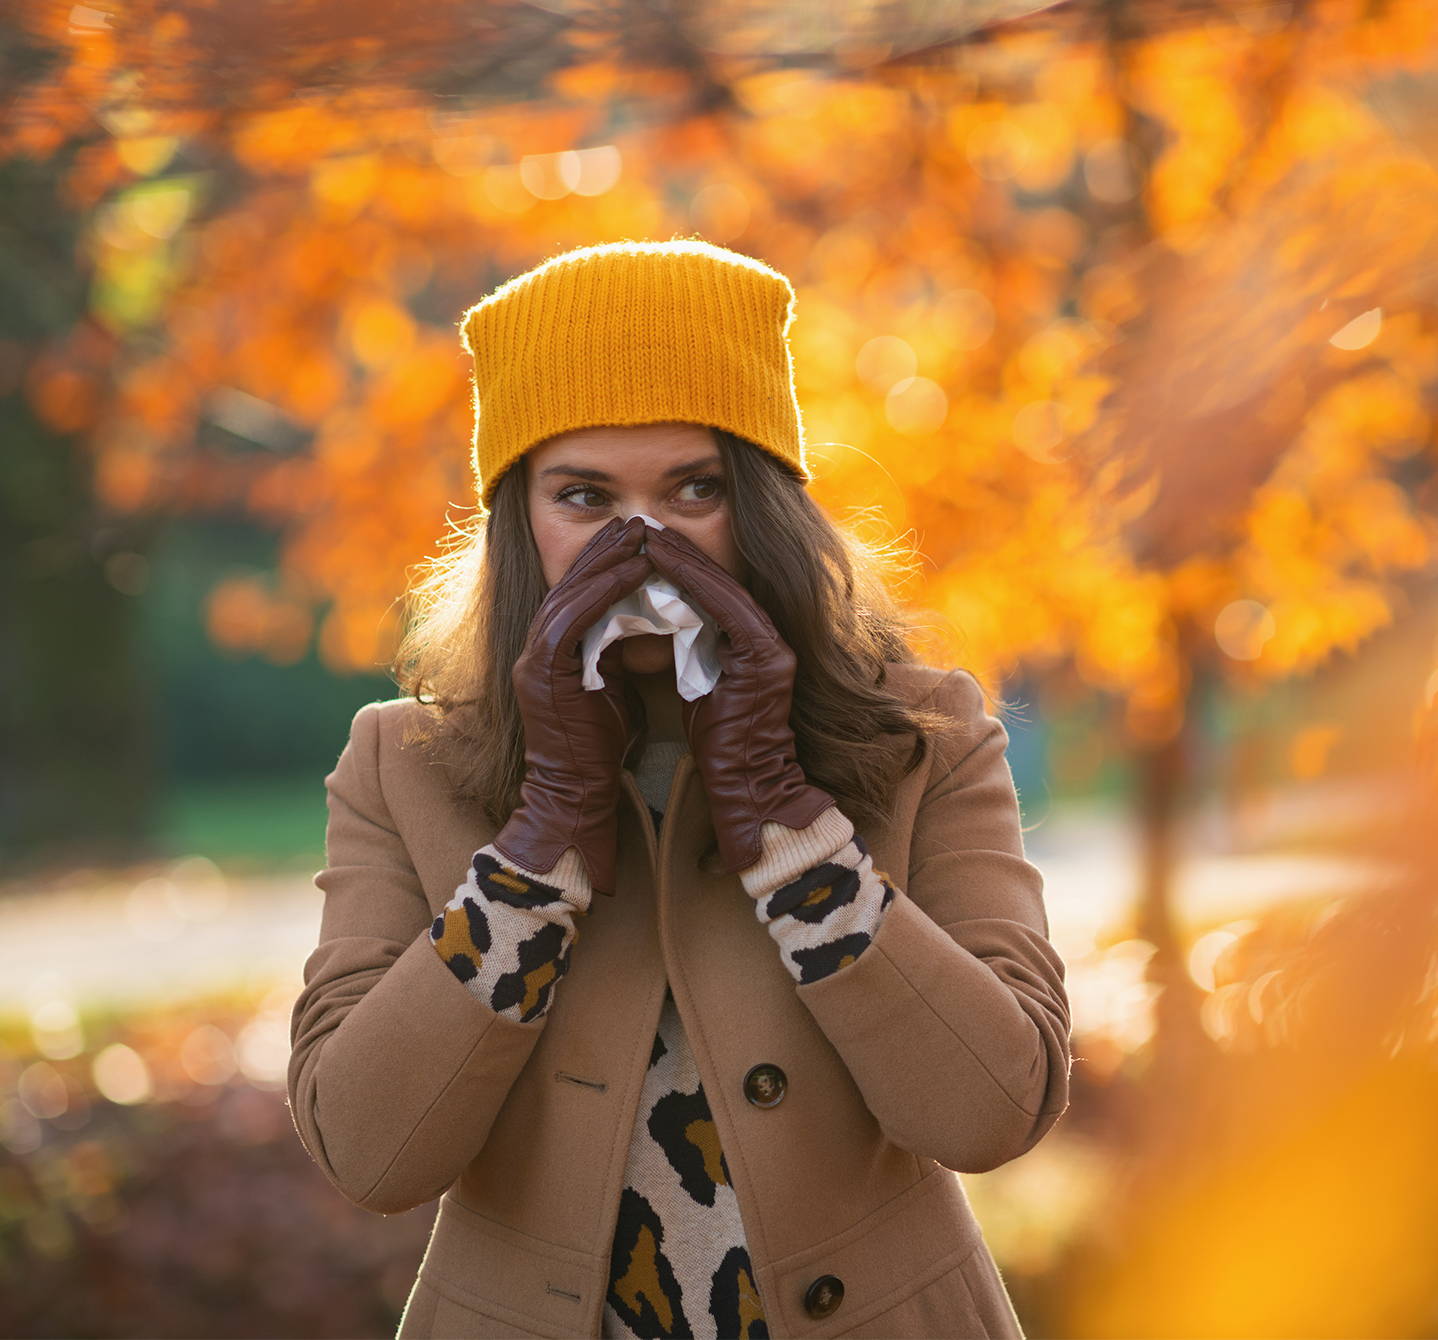  Symptoms of mold allergy - woman in hat and gloves blowing her nose in reaction to mold growing in fallen autumn leaves